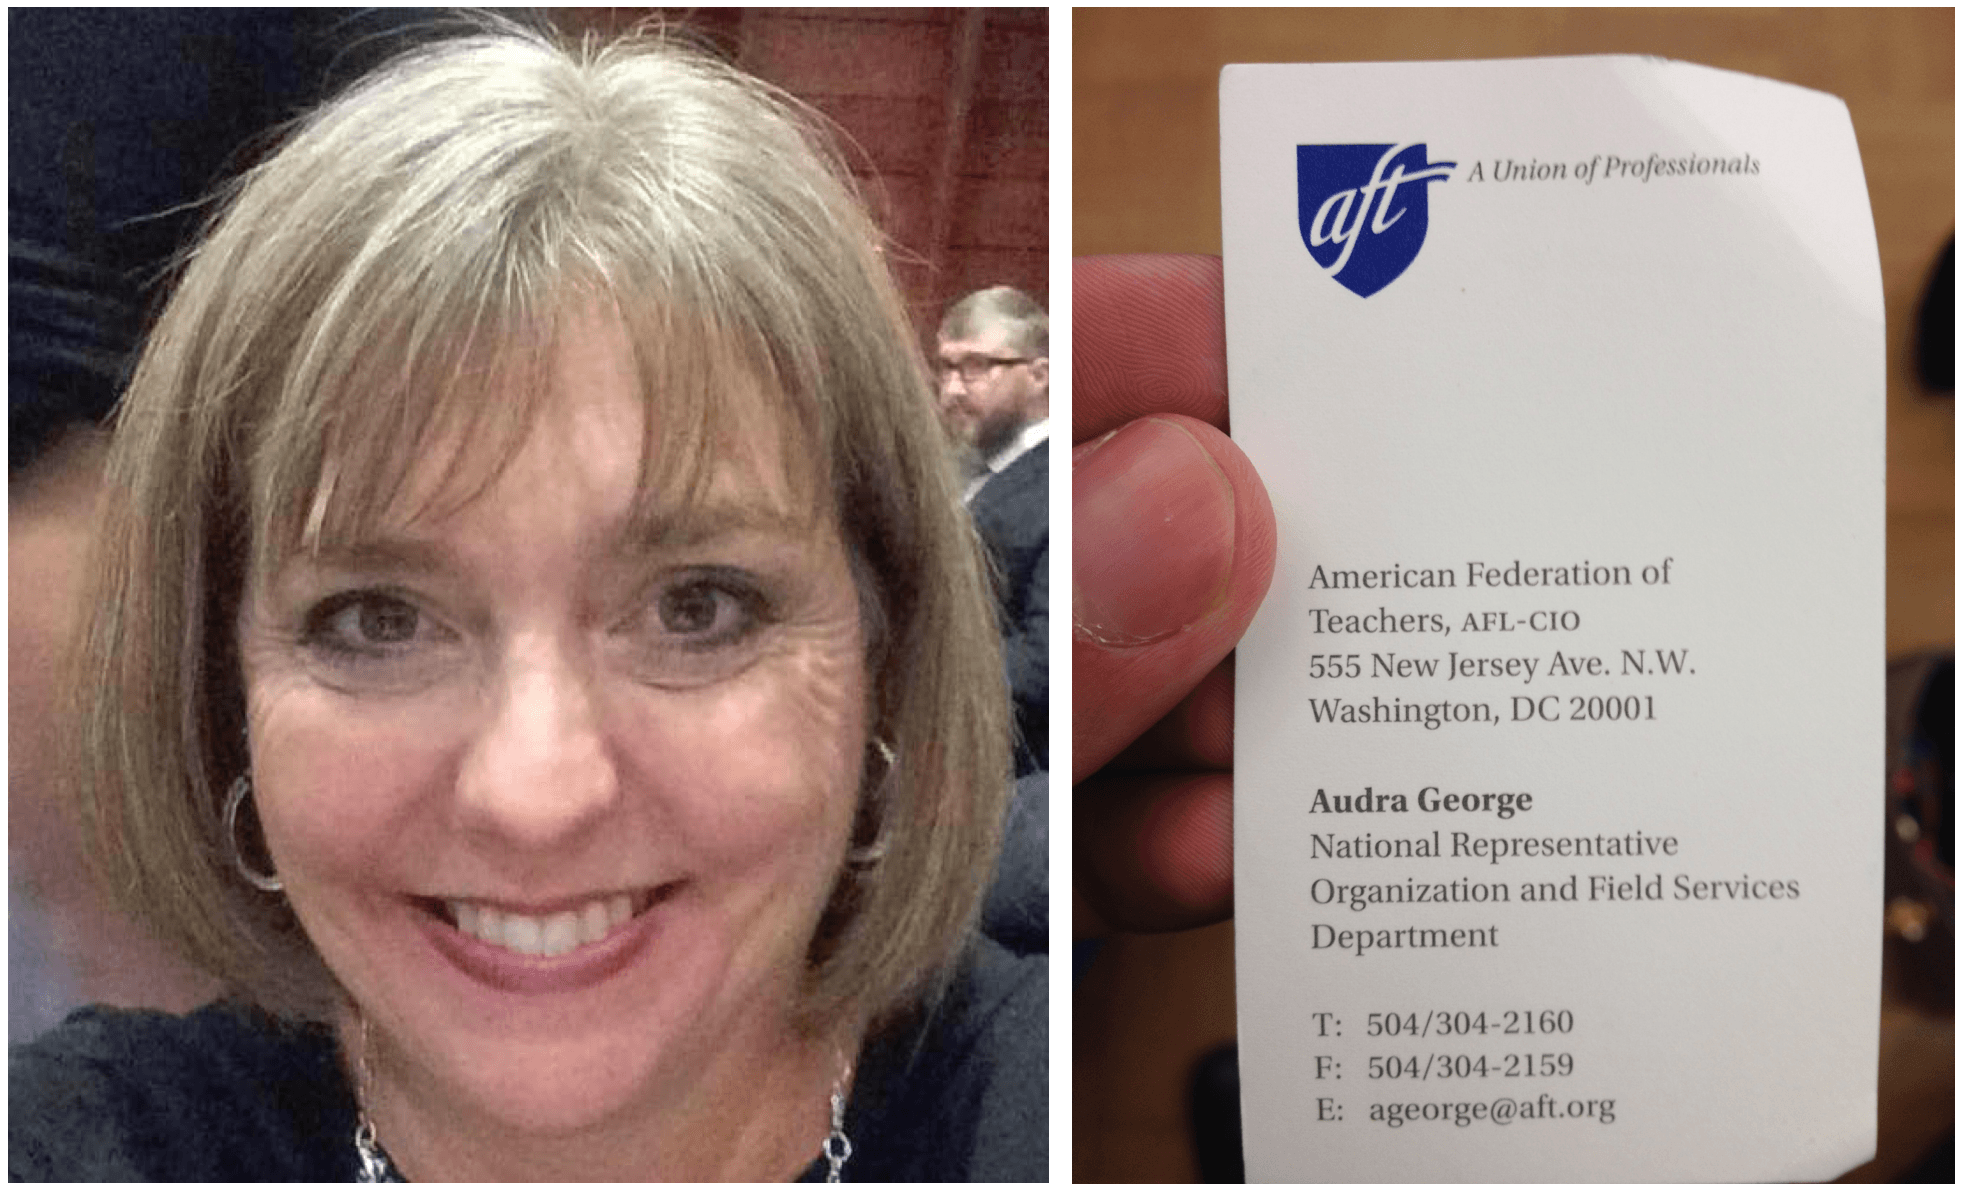 AFT's Audra George: Not as nice as she appears in this photo.